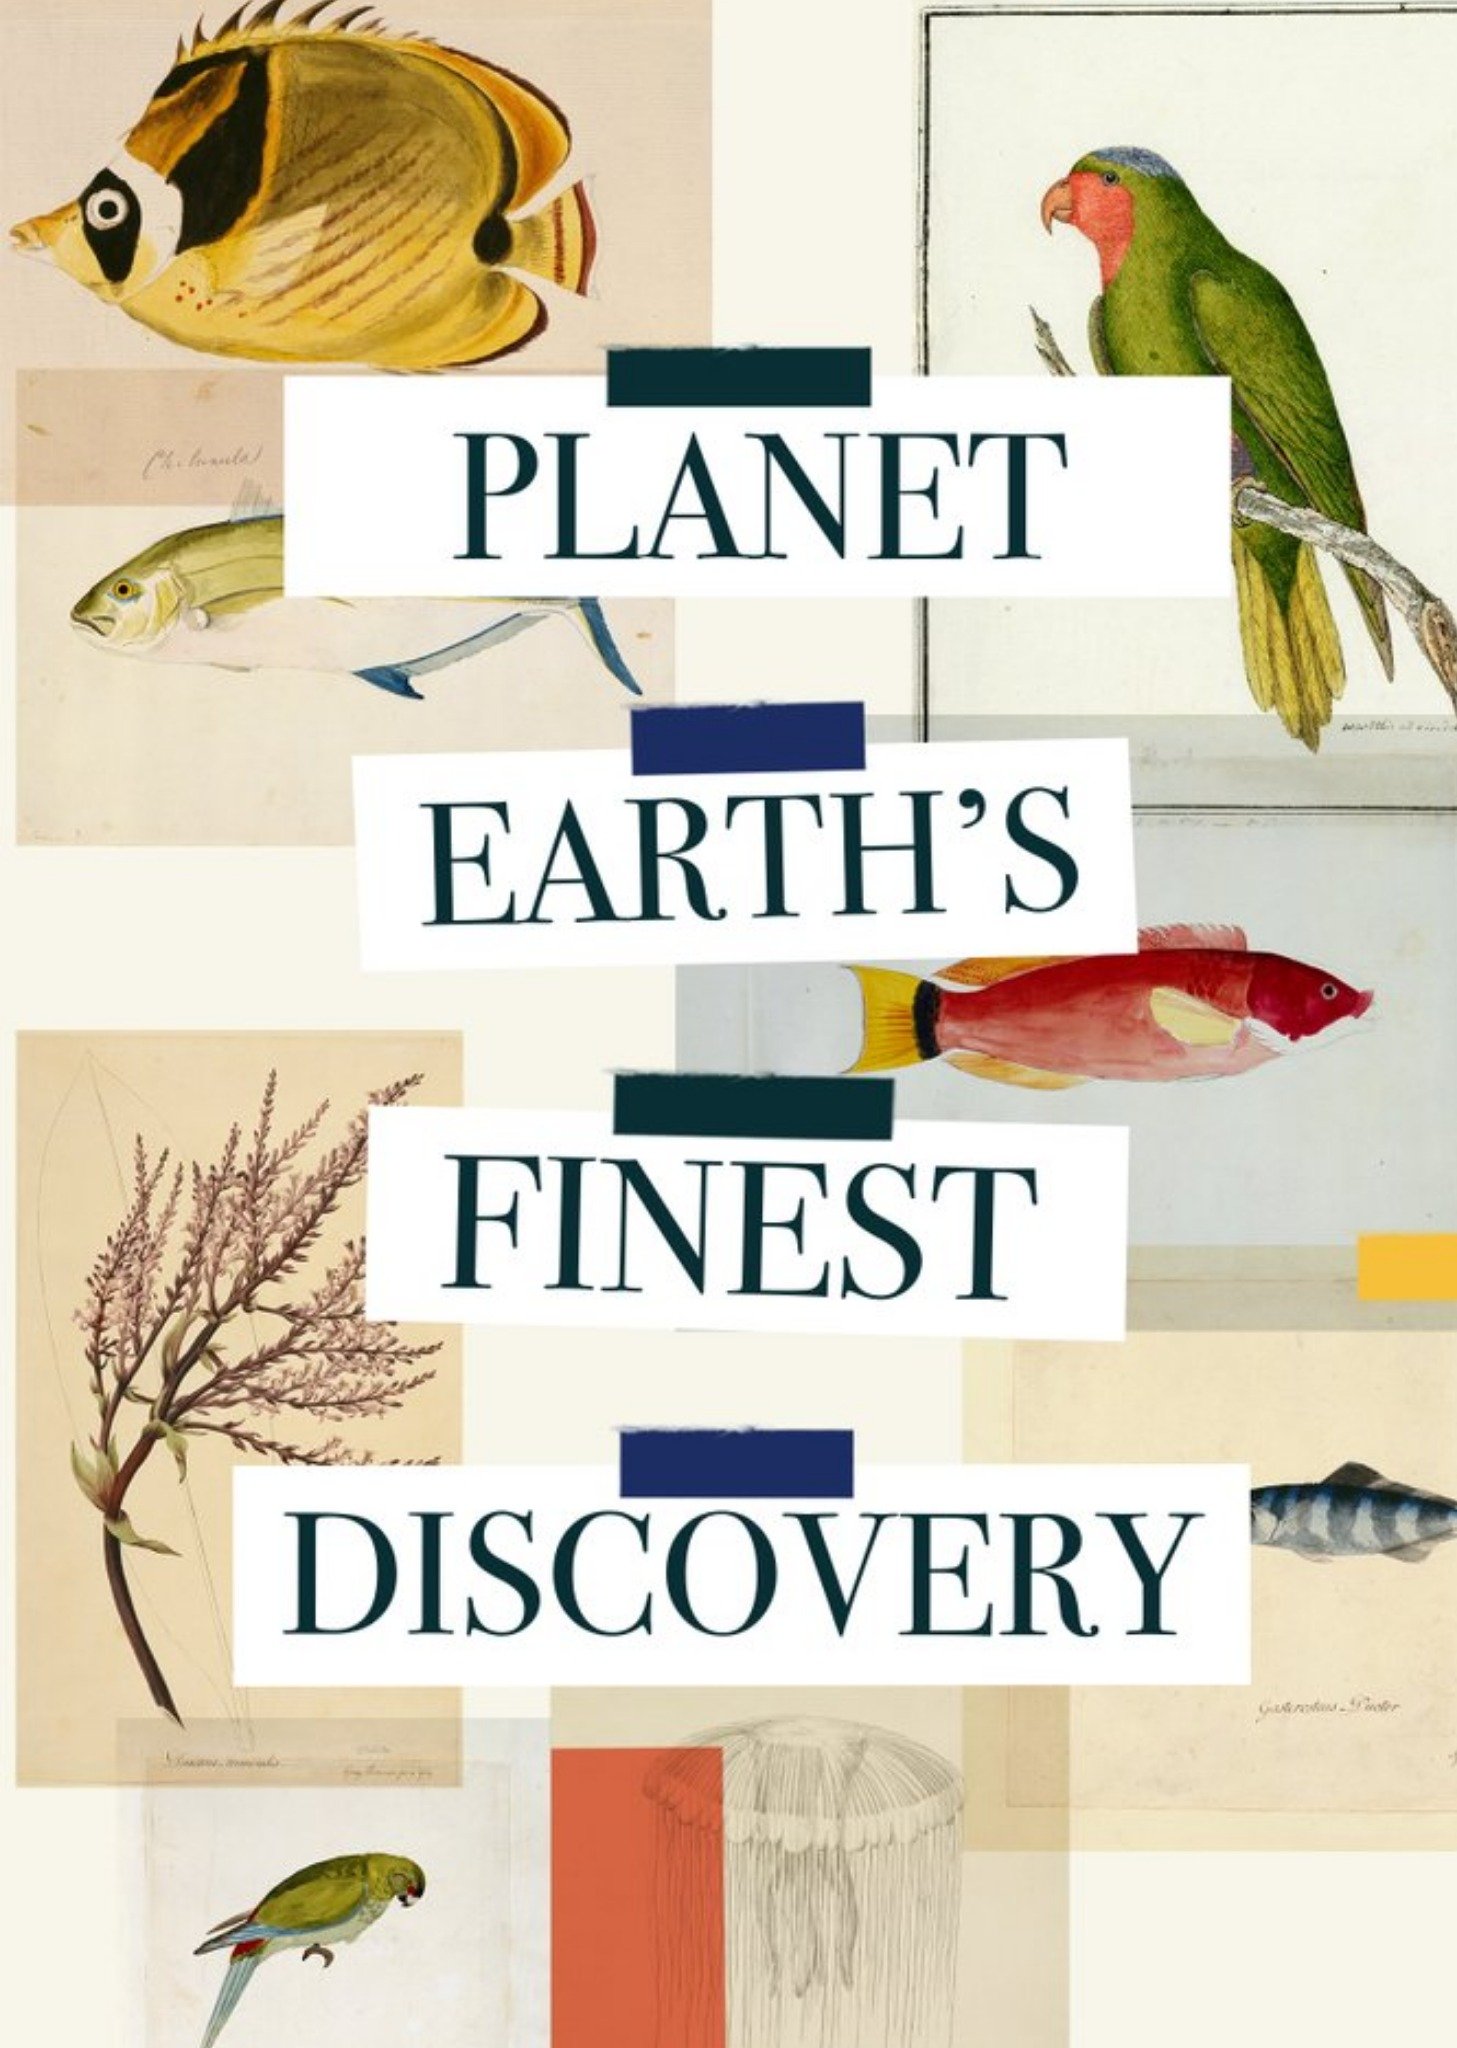 The Natural History Museum Natural History Museum Planet Earth's Finest Discovery Birthday Card Ecar